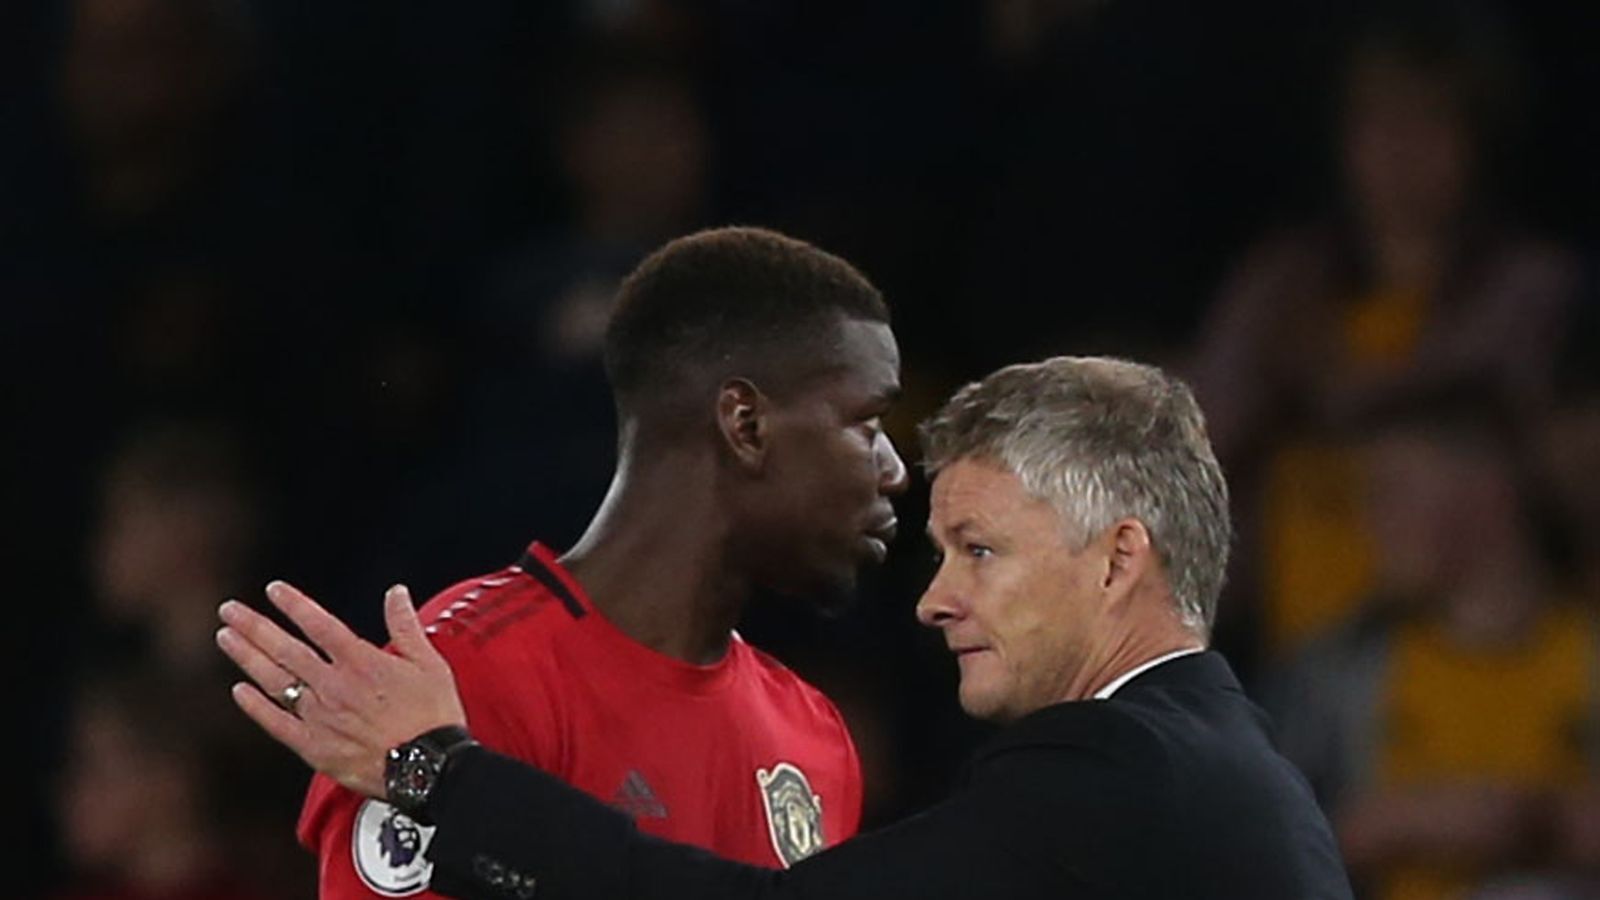 Solskjaer Wants Pogba to Display the Leadership That Won Him the World Cup